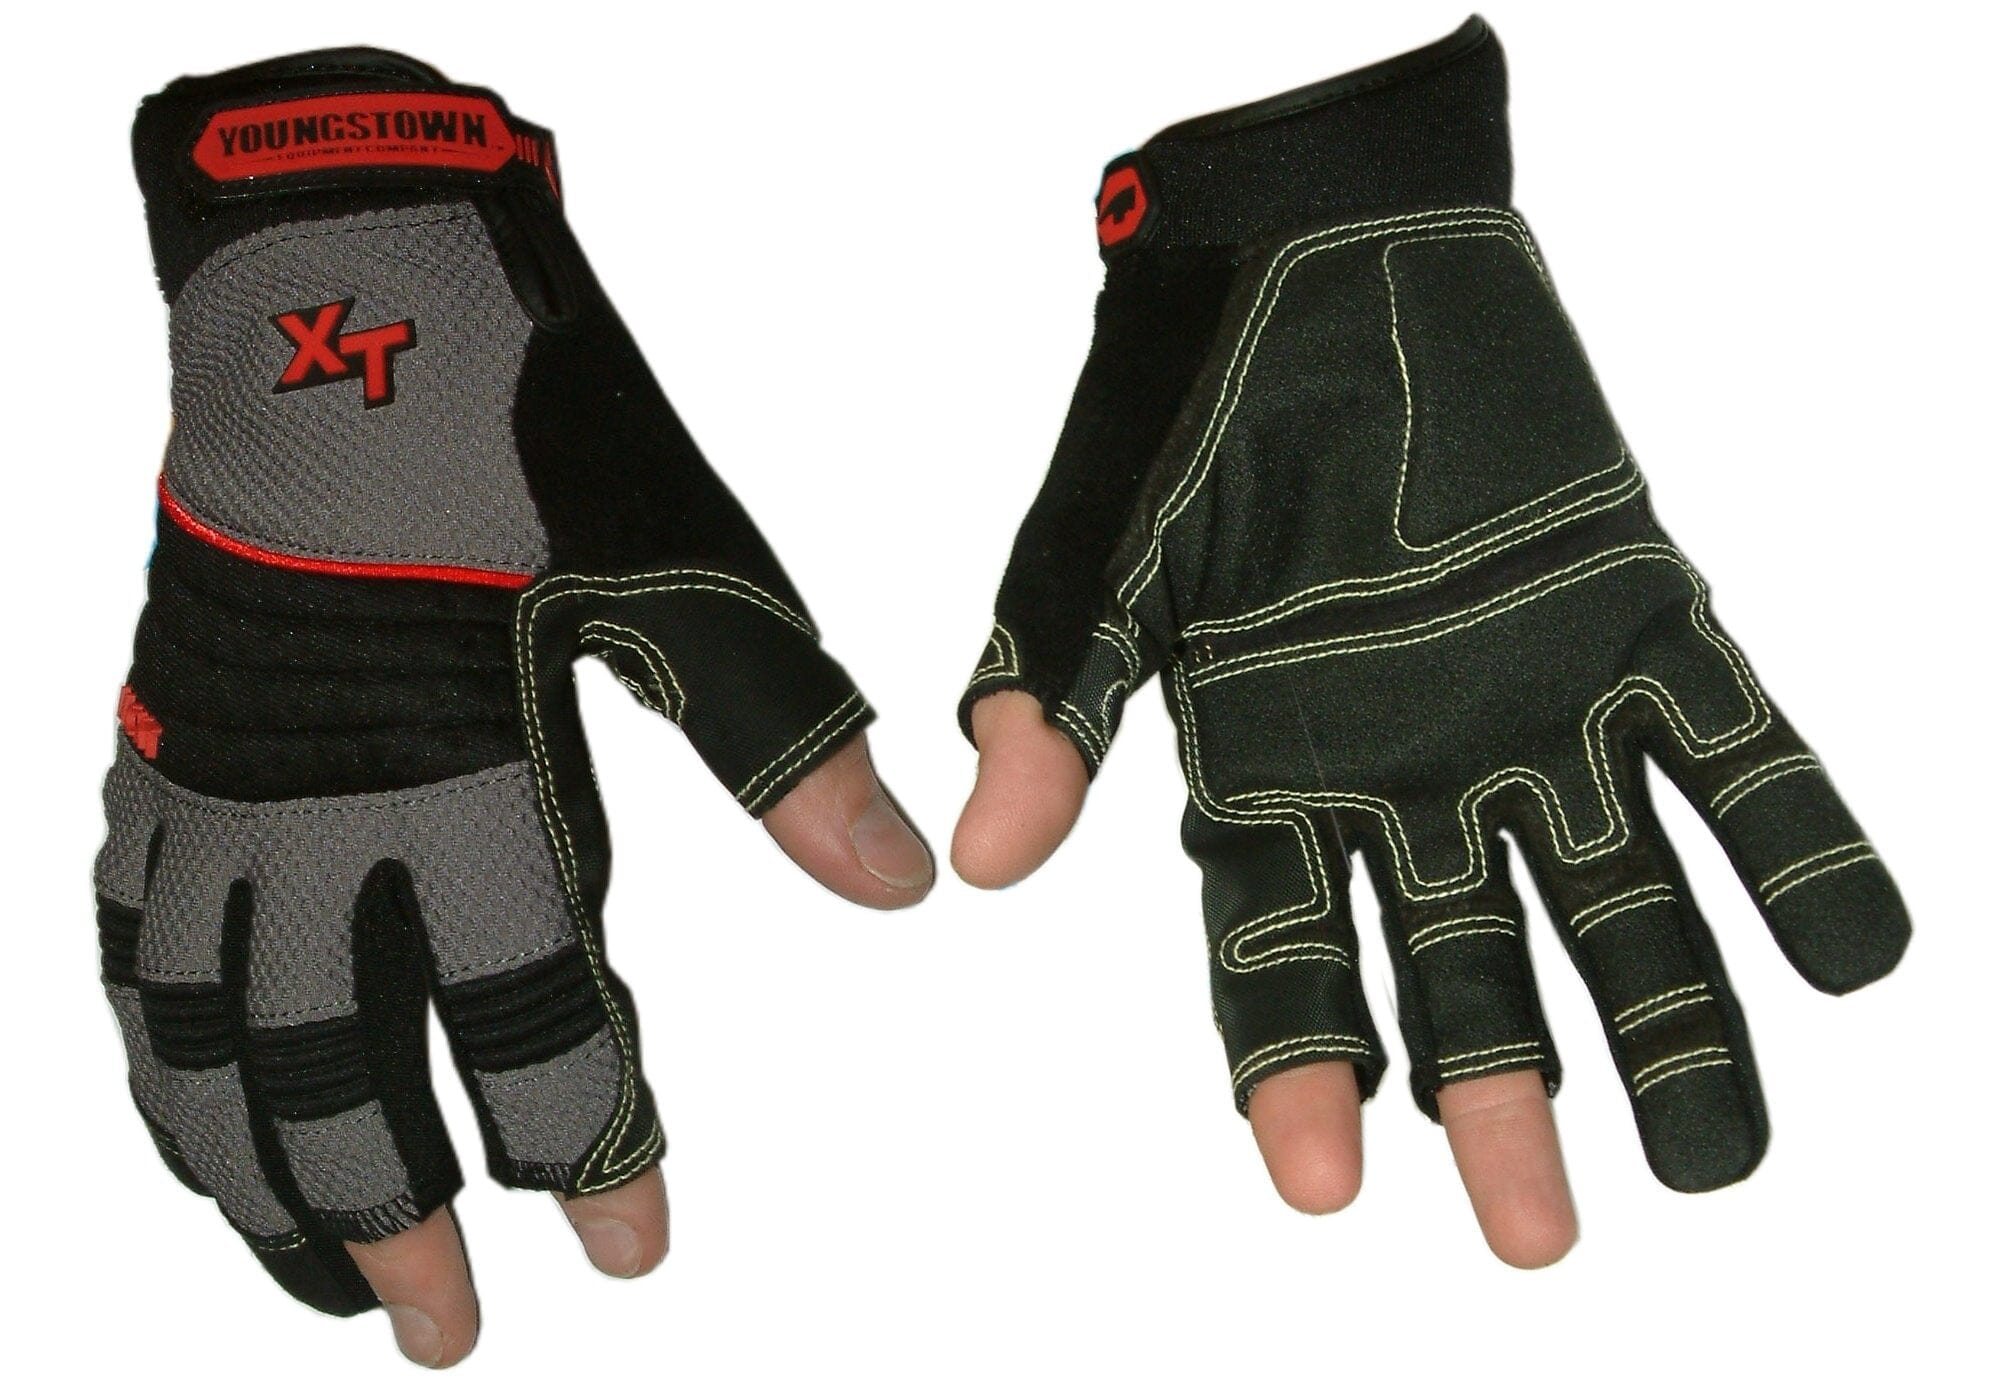 Youngstown Carpenter Plus Gloves 03-3110-80 Large